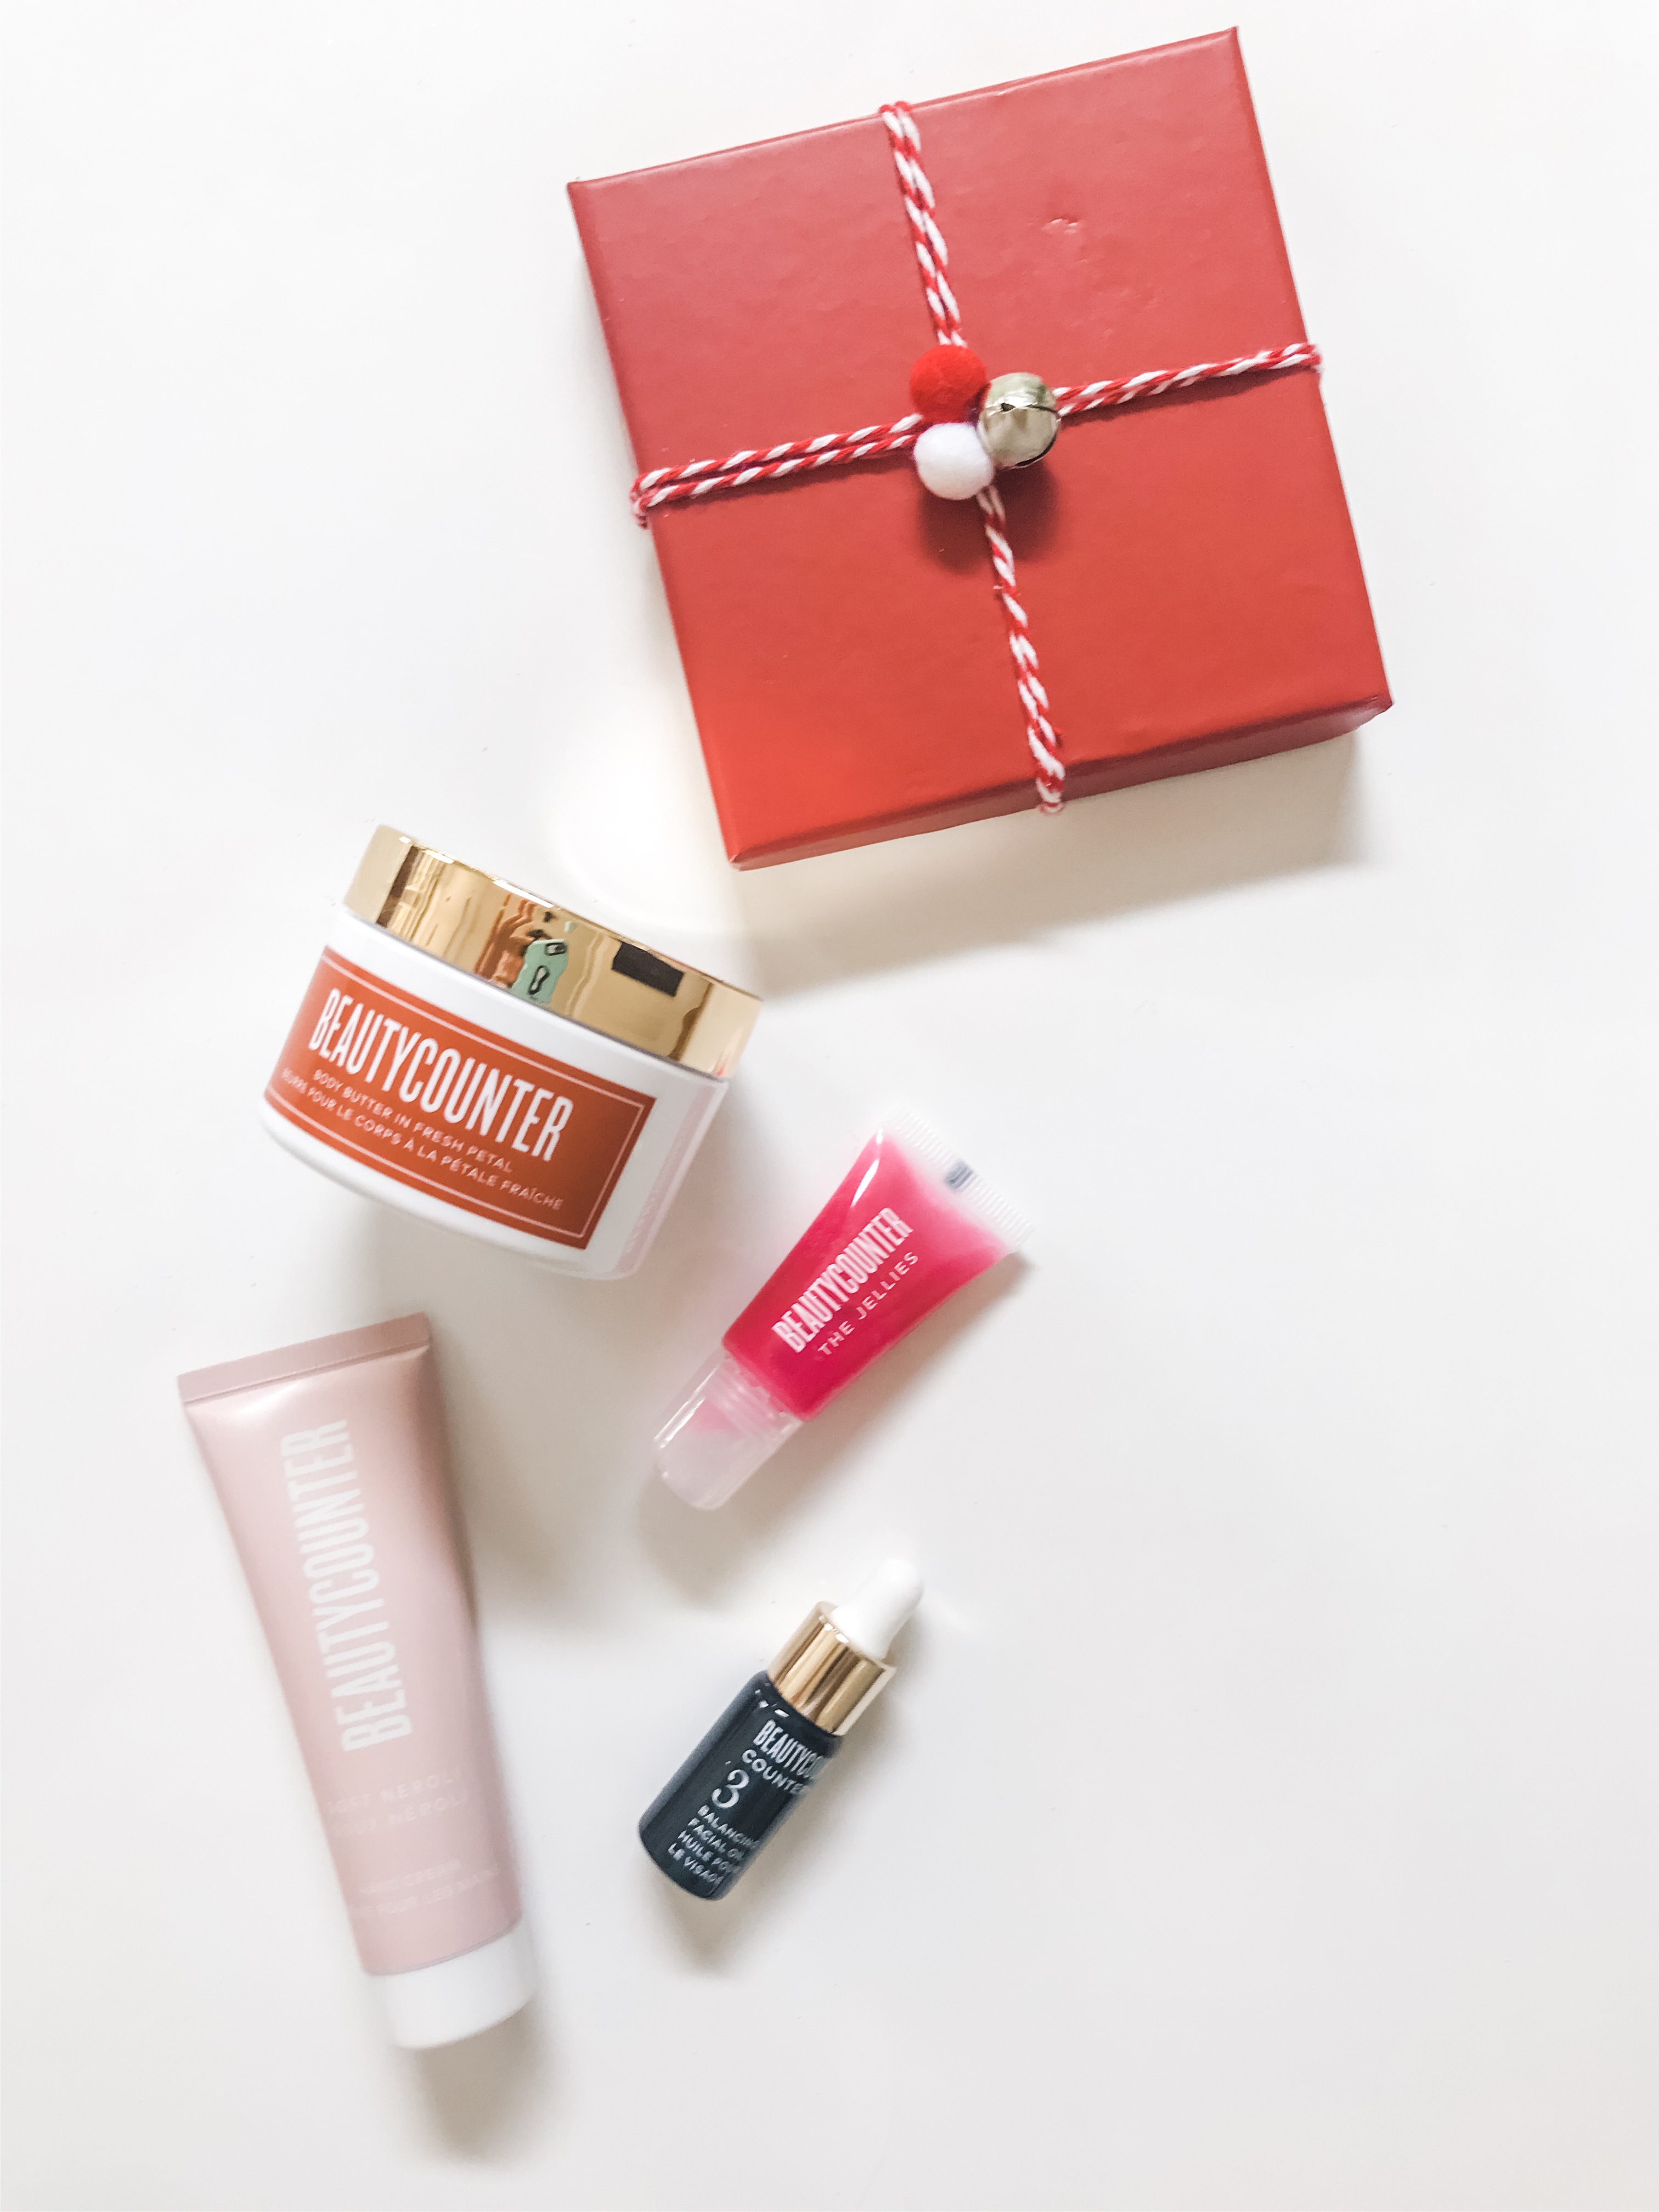 Gifts For her. Hostess gifts. Clean beauty gifts. Beautycounter